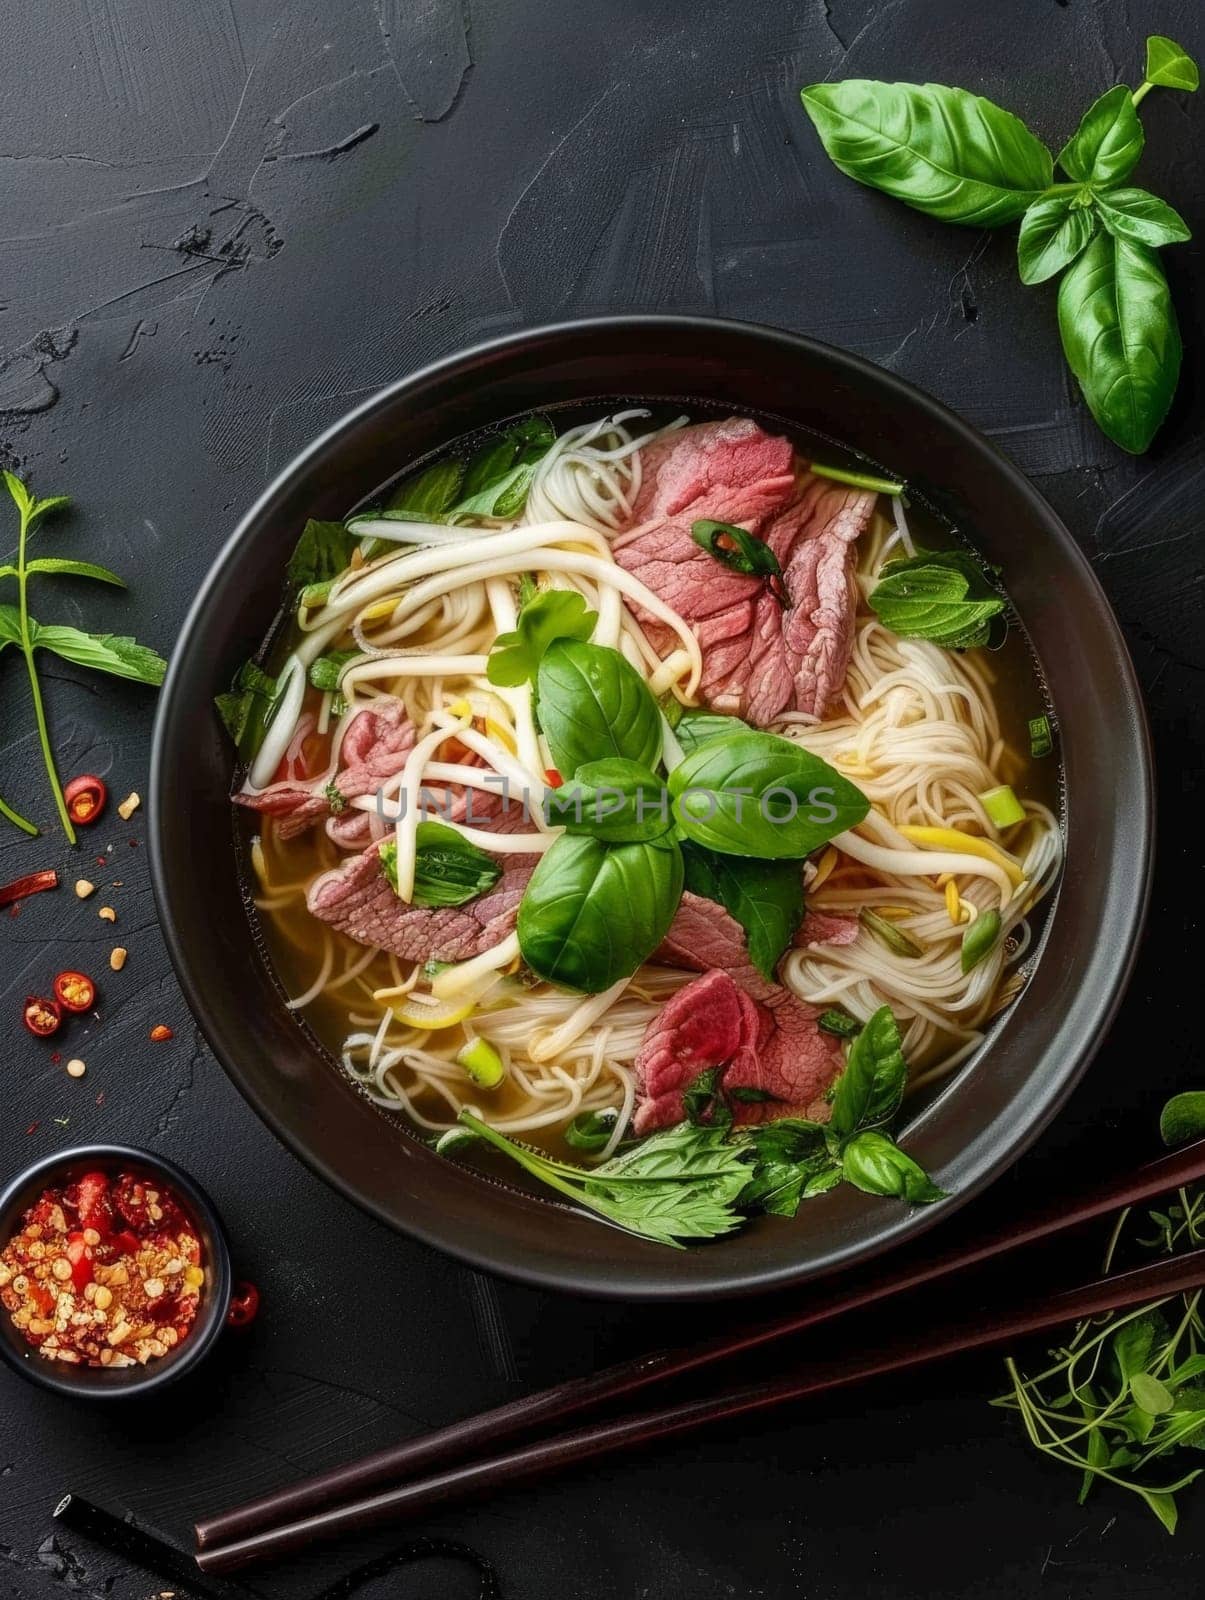 Aromatic Vietnamese pho, a steaming bowl brimming with rice noodles, thinly sliced beef, and a variety of fresh herbs - a comforting and flavor-packed representation of traditional Vietnamese cuisine